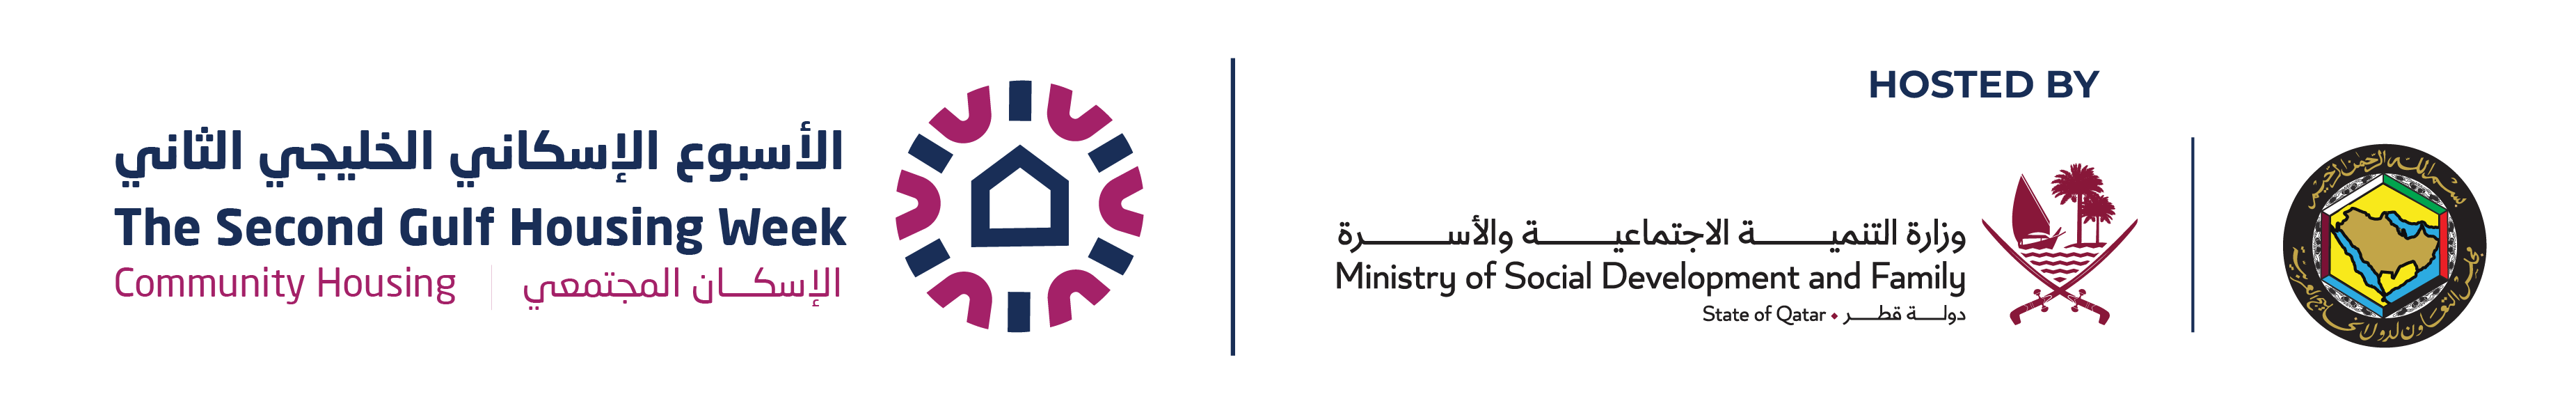 The Second Gulf Housing Week and MOSDF Logo